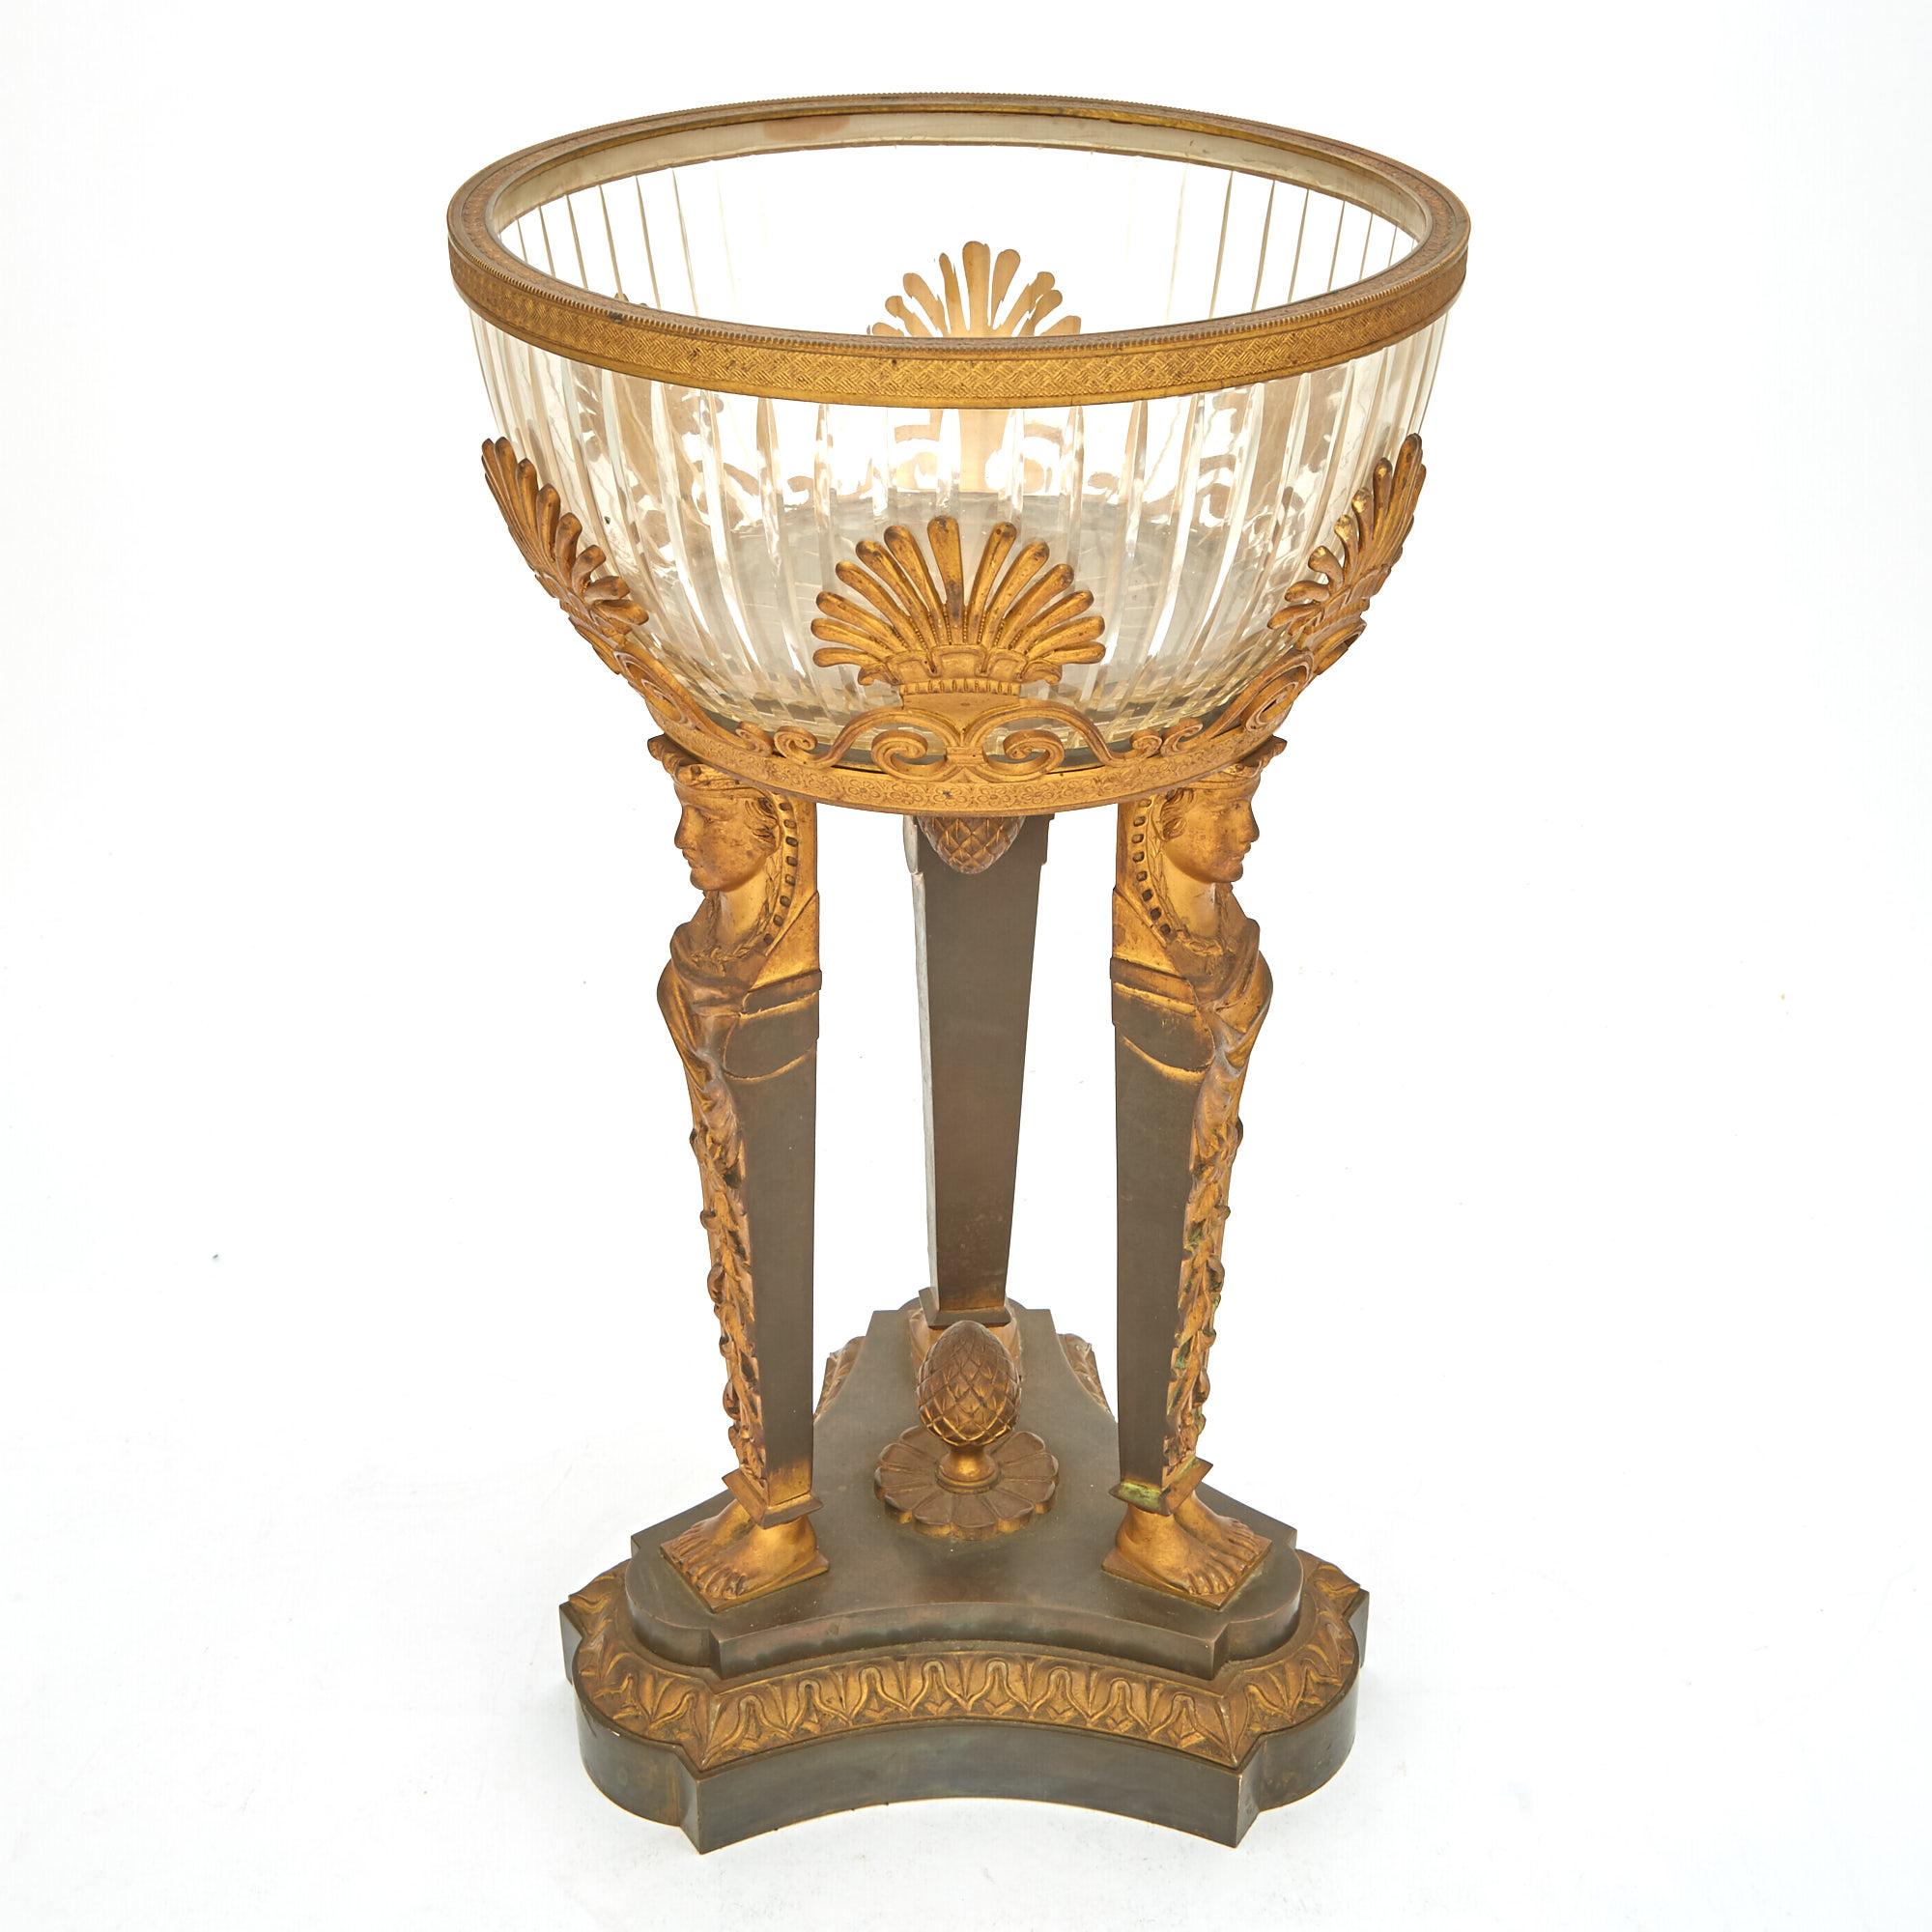 Step into the splendor of the 19th century with this exceptional Empire-style tableware centerpiece, a captivating union of gilt bronze mounts and cut glass that epitomizes the opulence of the era. At its heart lies a removable circular cut glass